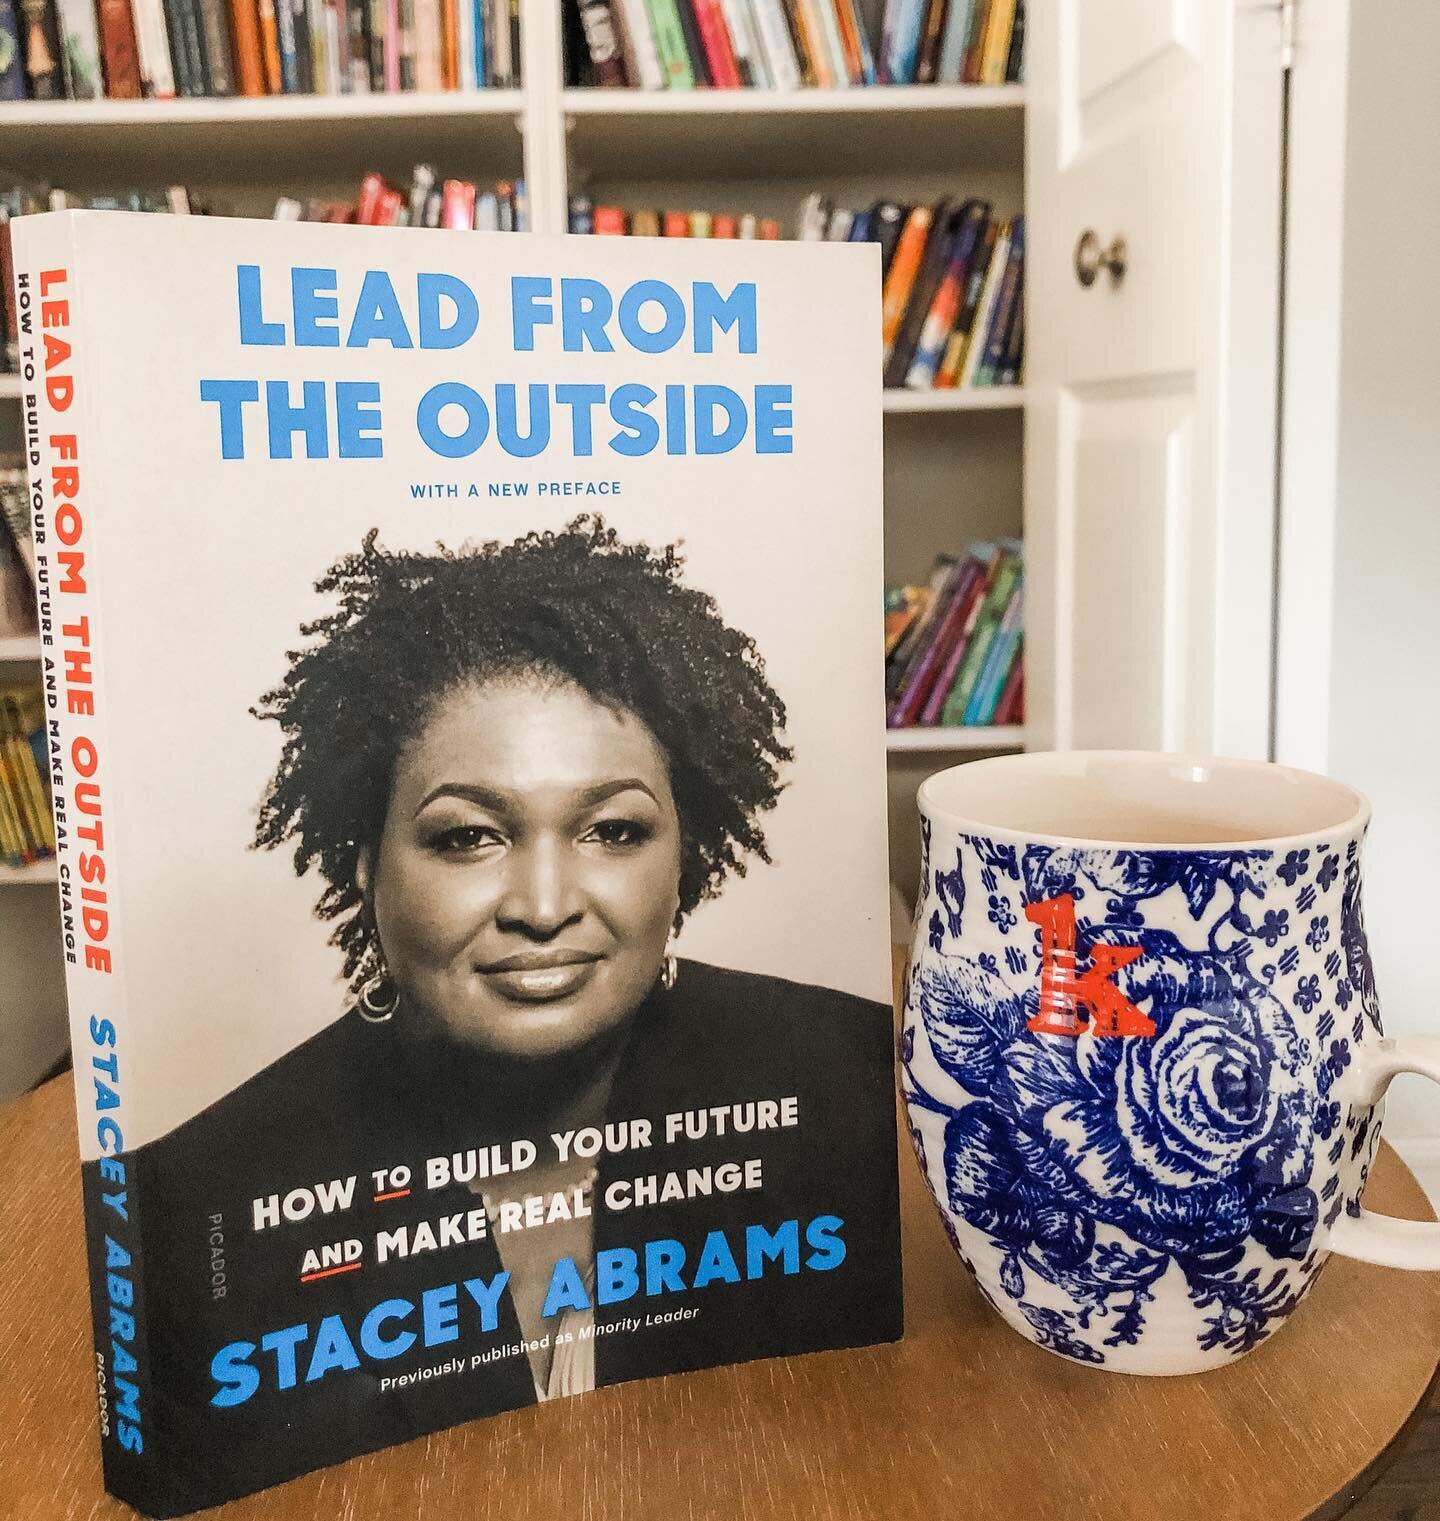 If you tune in to the news today, you will see immense appreciation for Stacey Abrams and her efforts with boosting voter turnout in the state of Georgia and country. Many people, including myself, are inspired by all that she has done. 

I read her 